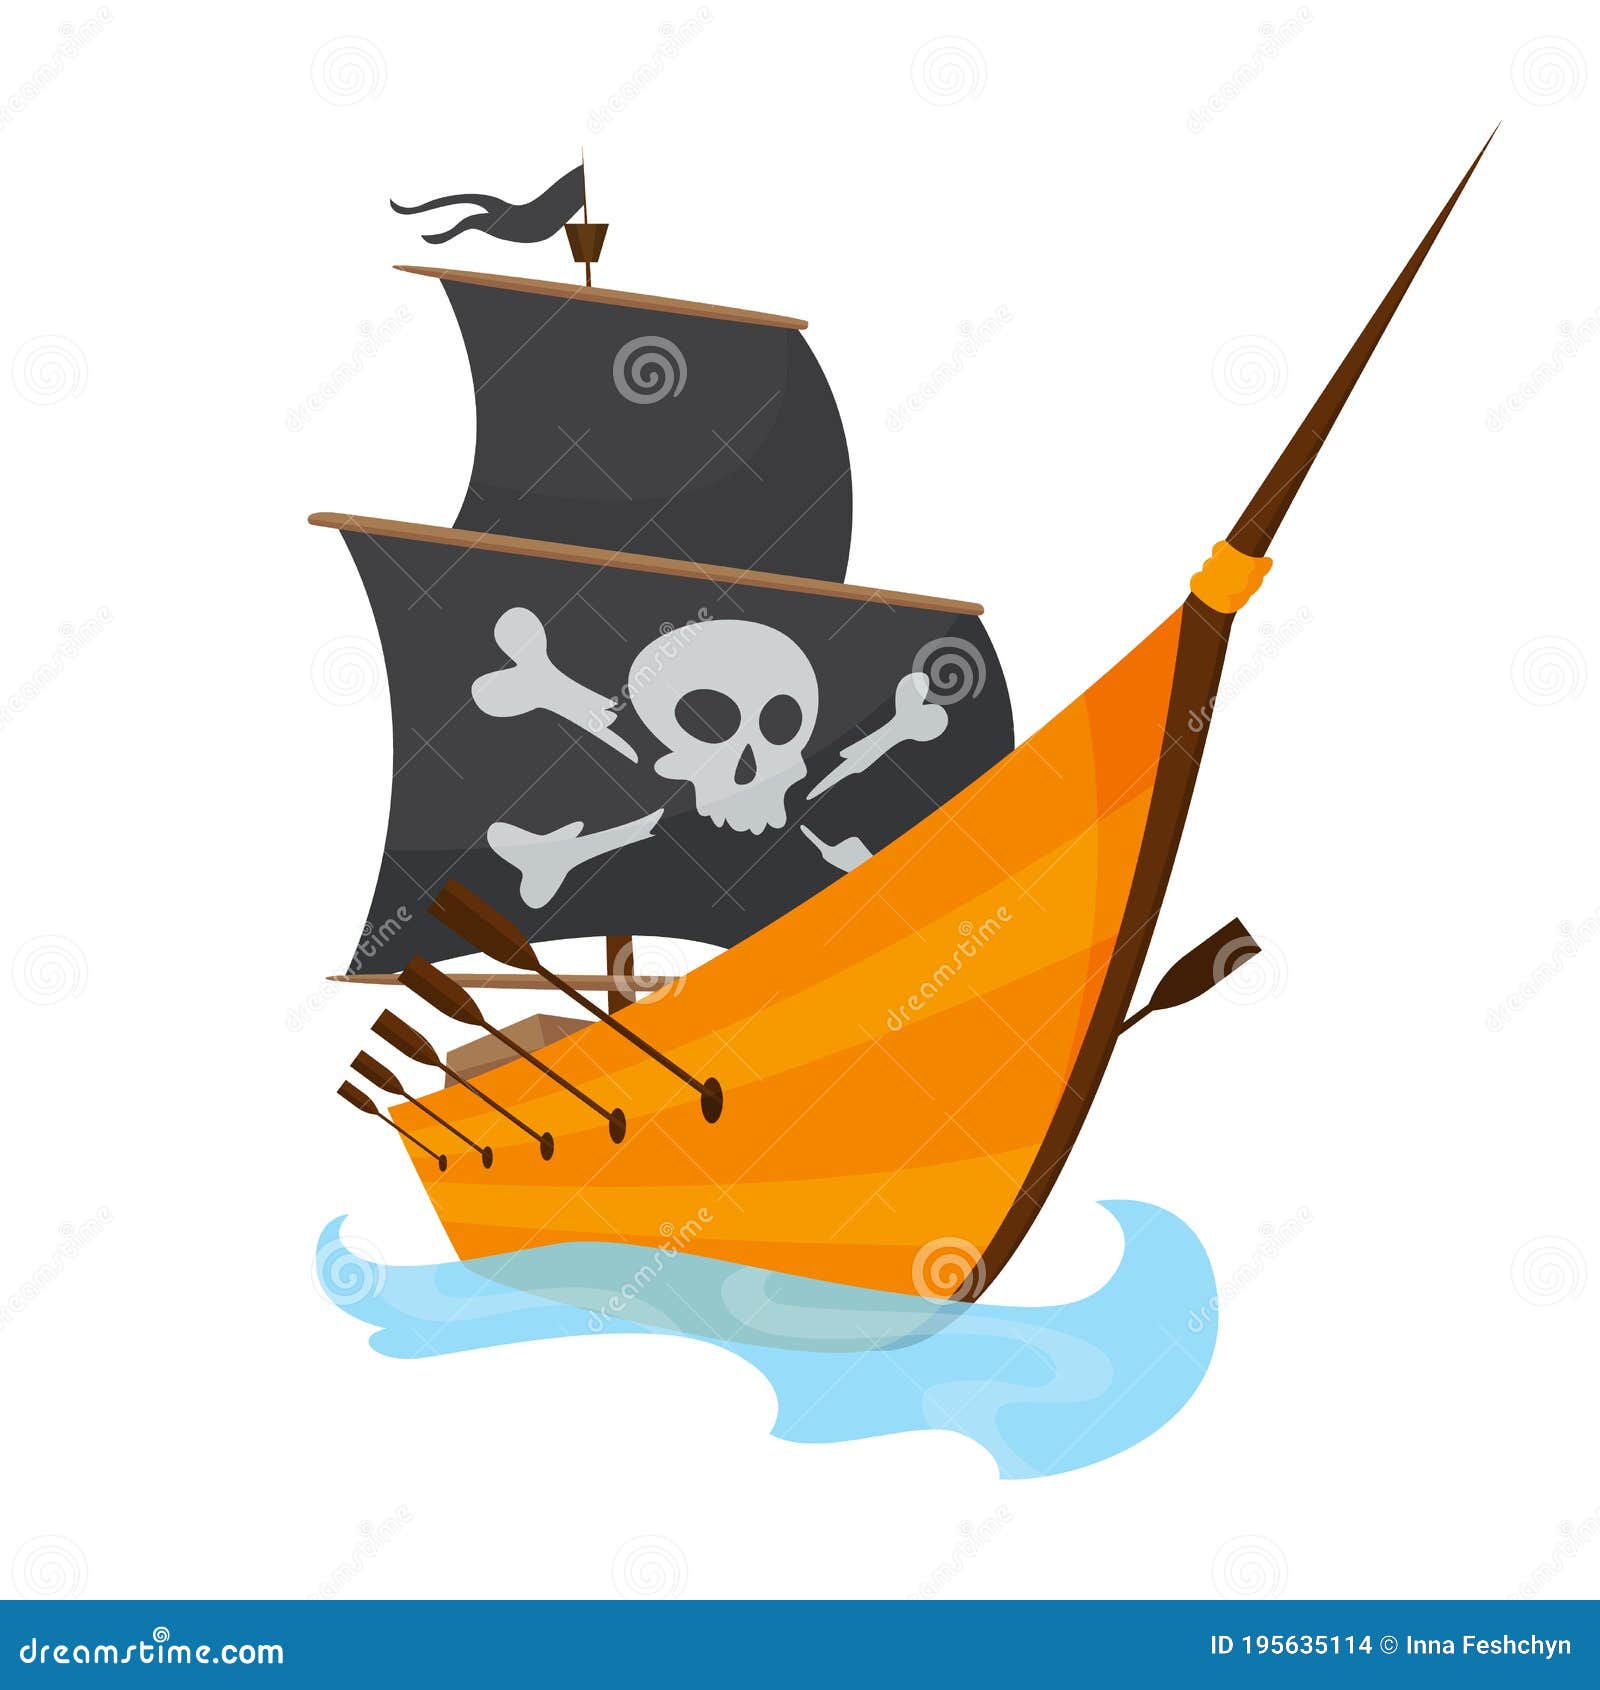 Stylized Cartoon Pirate Ship Illustration with Jolly Roger and Black Sails.  Cute Vector Drawing Stock Vector - Illustration of galleon, flag: 195635114